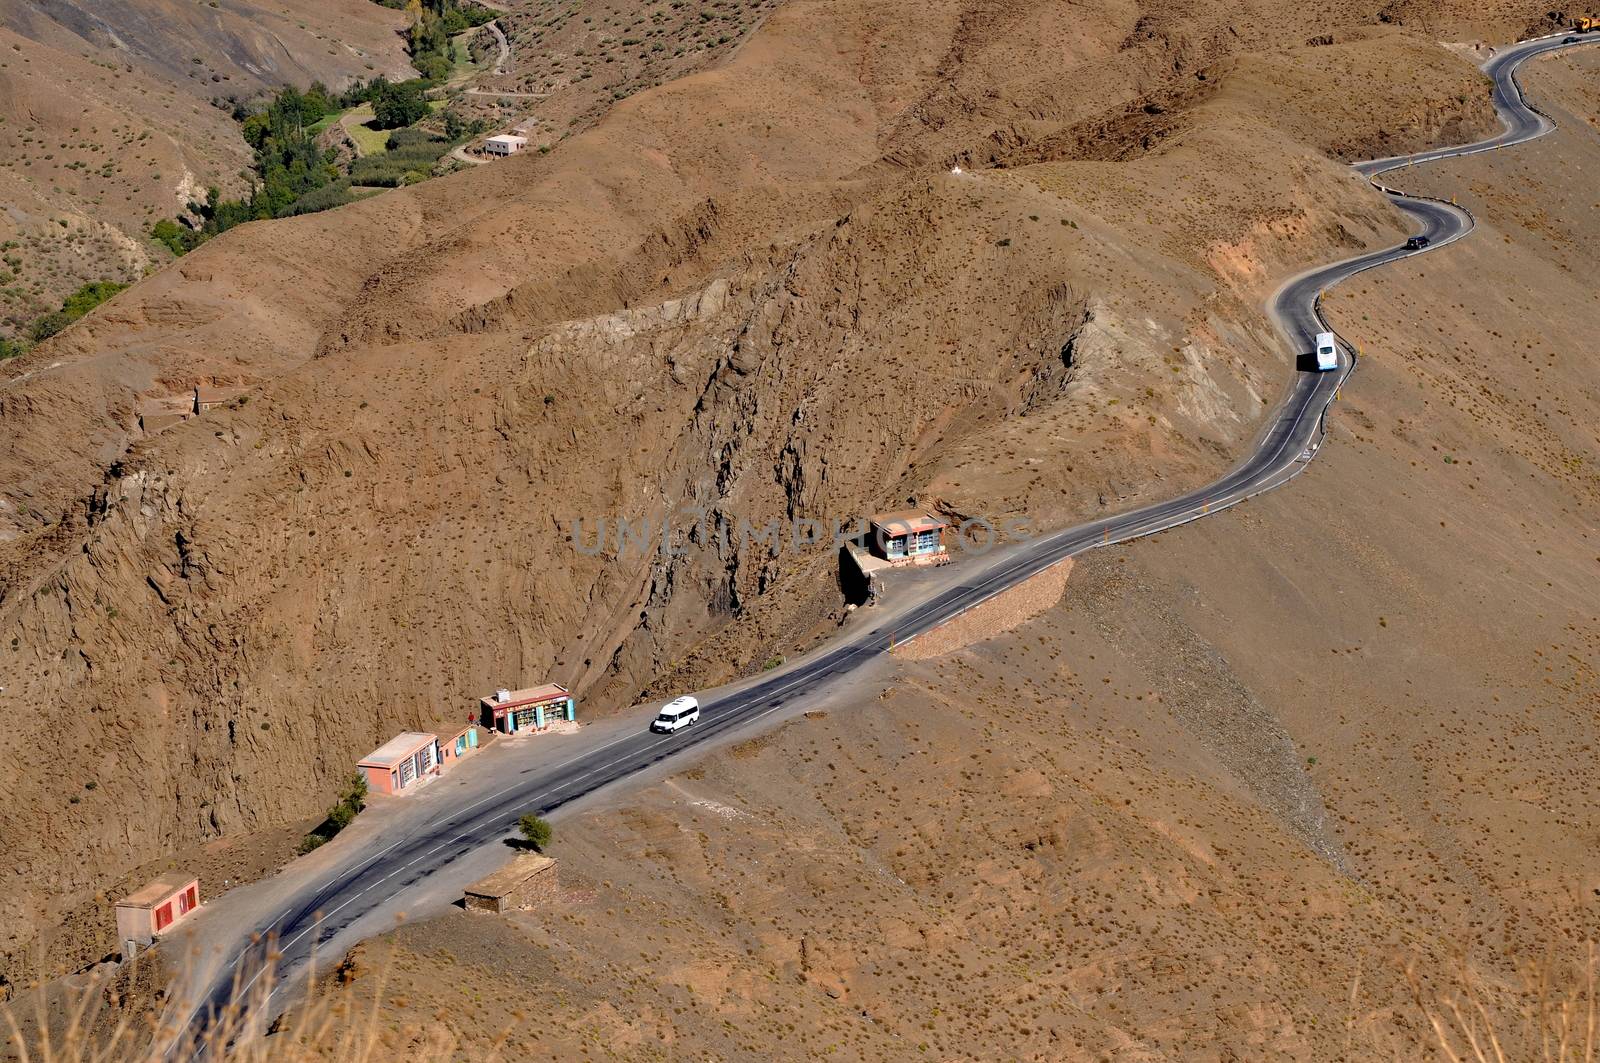 Curly road in the High Atlas mountains in Morocco